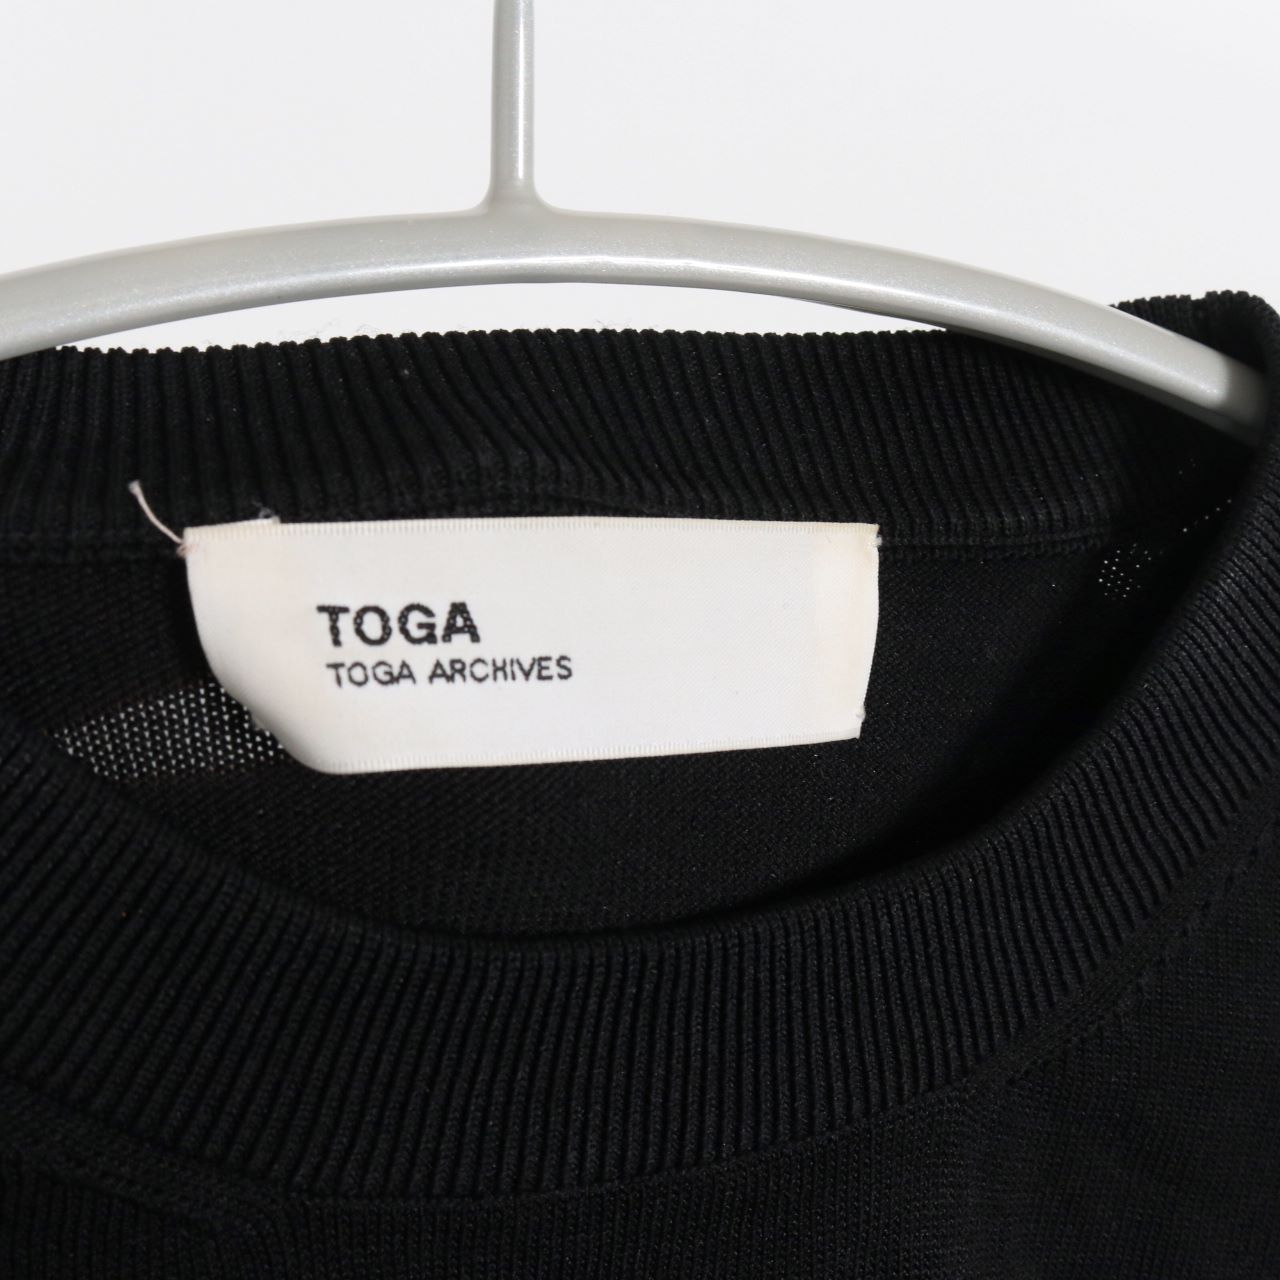 TOGA ARCHIVES(トーガアーカイブス) 21SS/Shoulder zip knit/TA11 